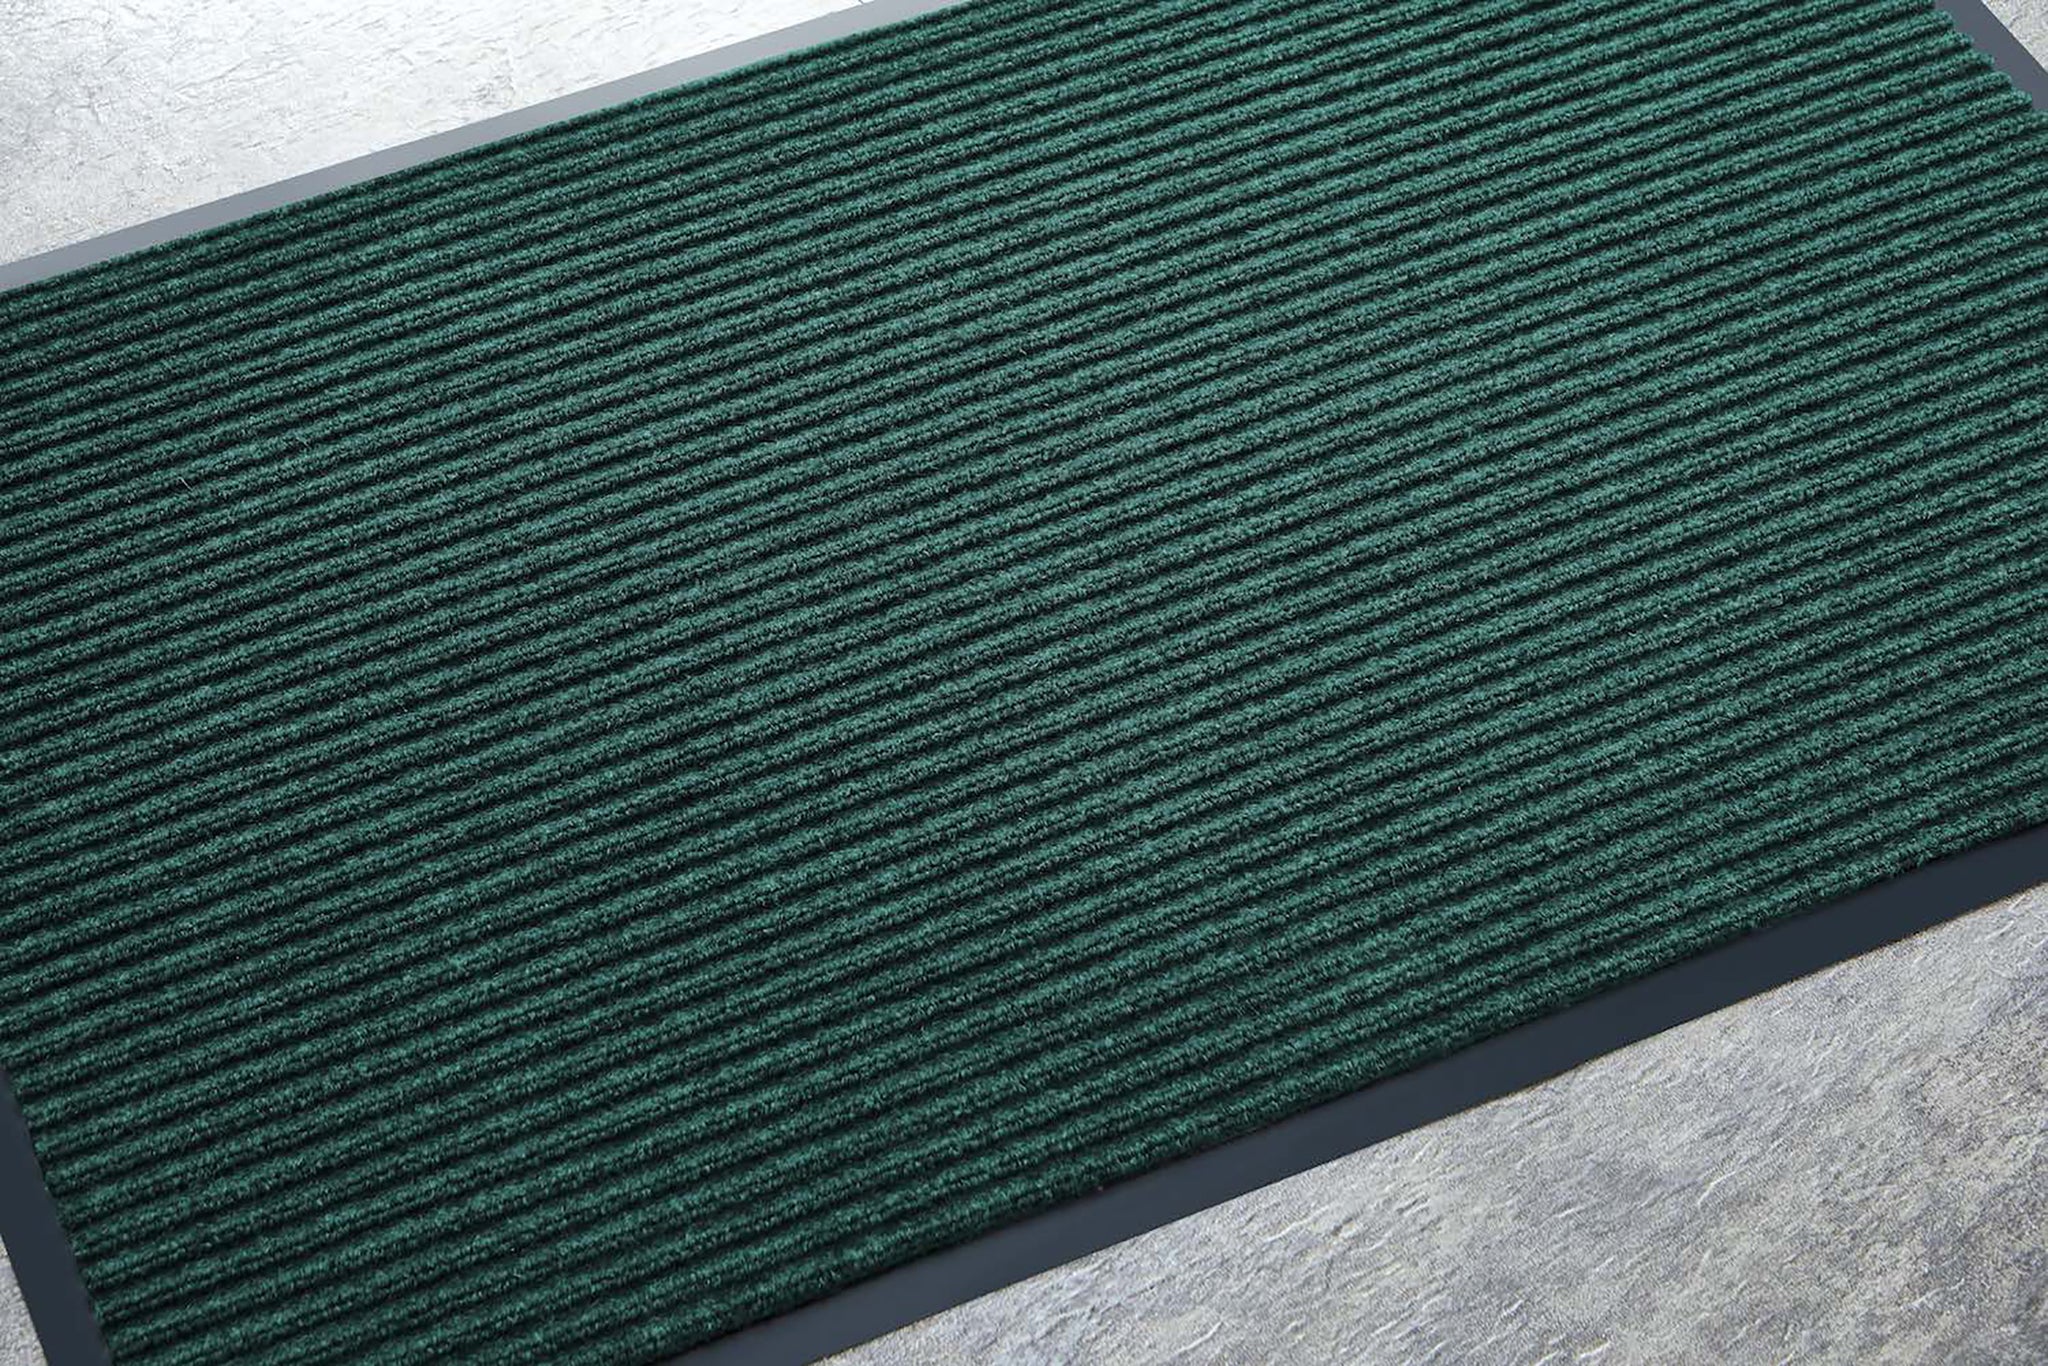 The Rug Hub Ribbed Non-Slip Indoor Outdoor Mat